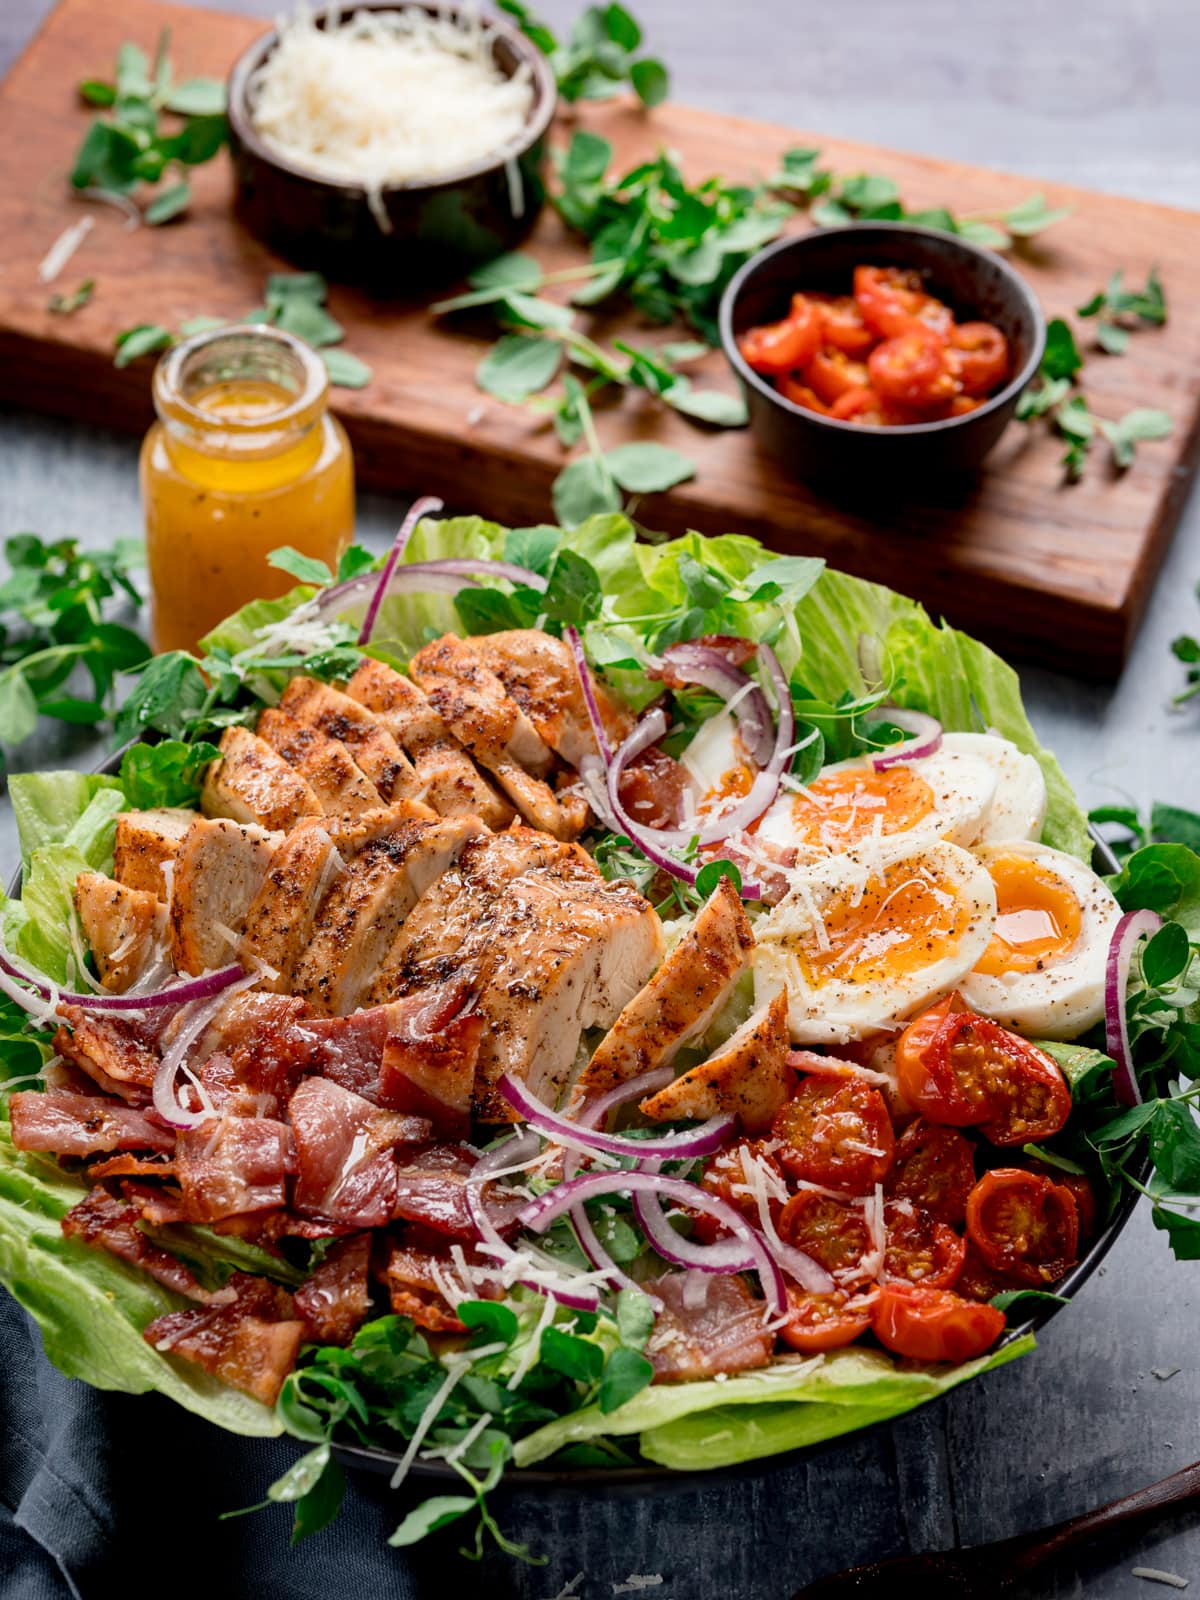 Tall image of a large BLT chicken salad with soft boiled eggs in a bowl on a blue background. There is a wooden board in the background with extra ingredients on it (tomatoes, parmesan and pea shoots). There is also a little bottle of salad dressing next to bowl.